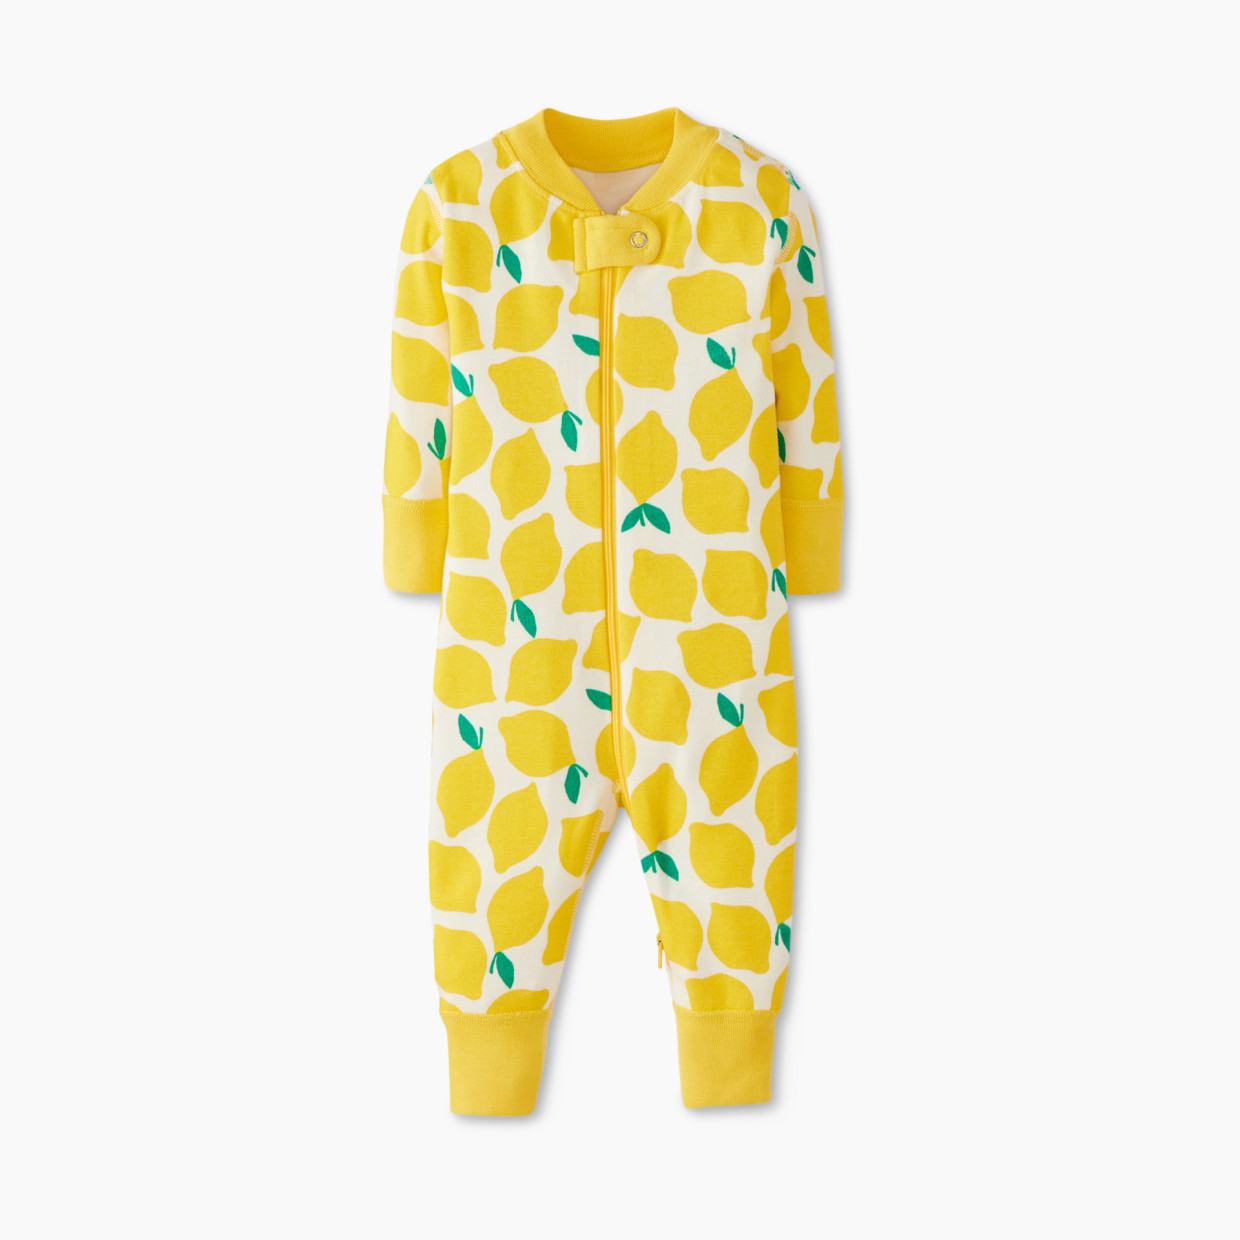 Hanna Andersson Baby Print Footless Sleeper - Lemon Stand, 0-3 Months.